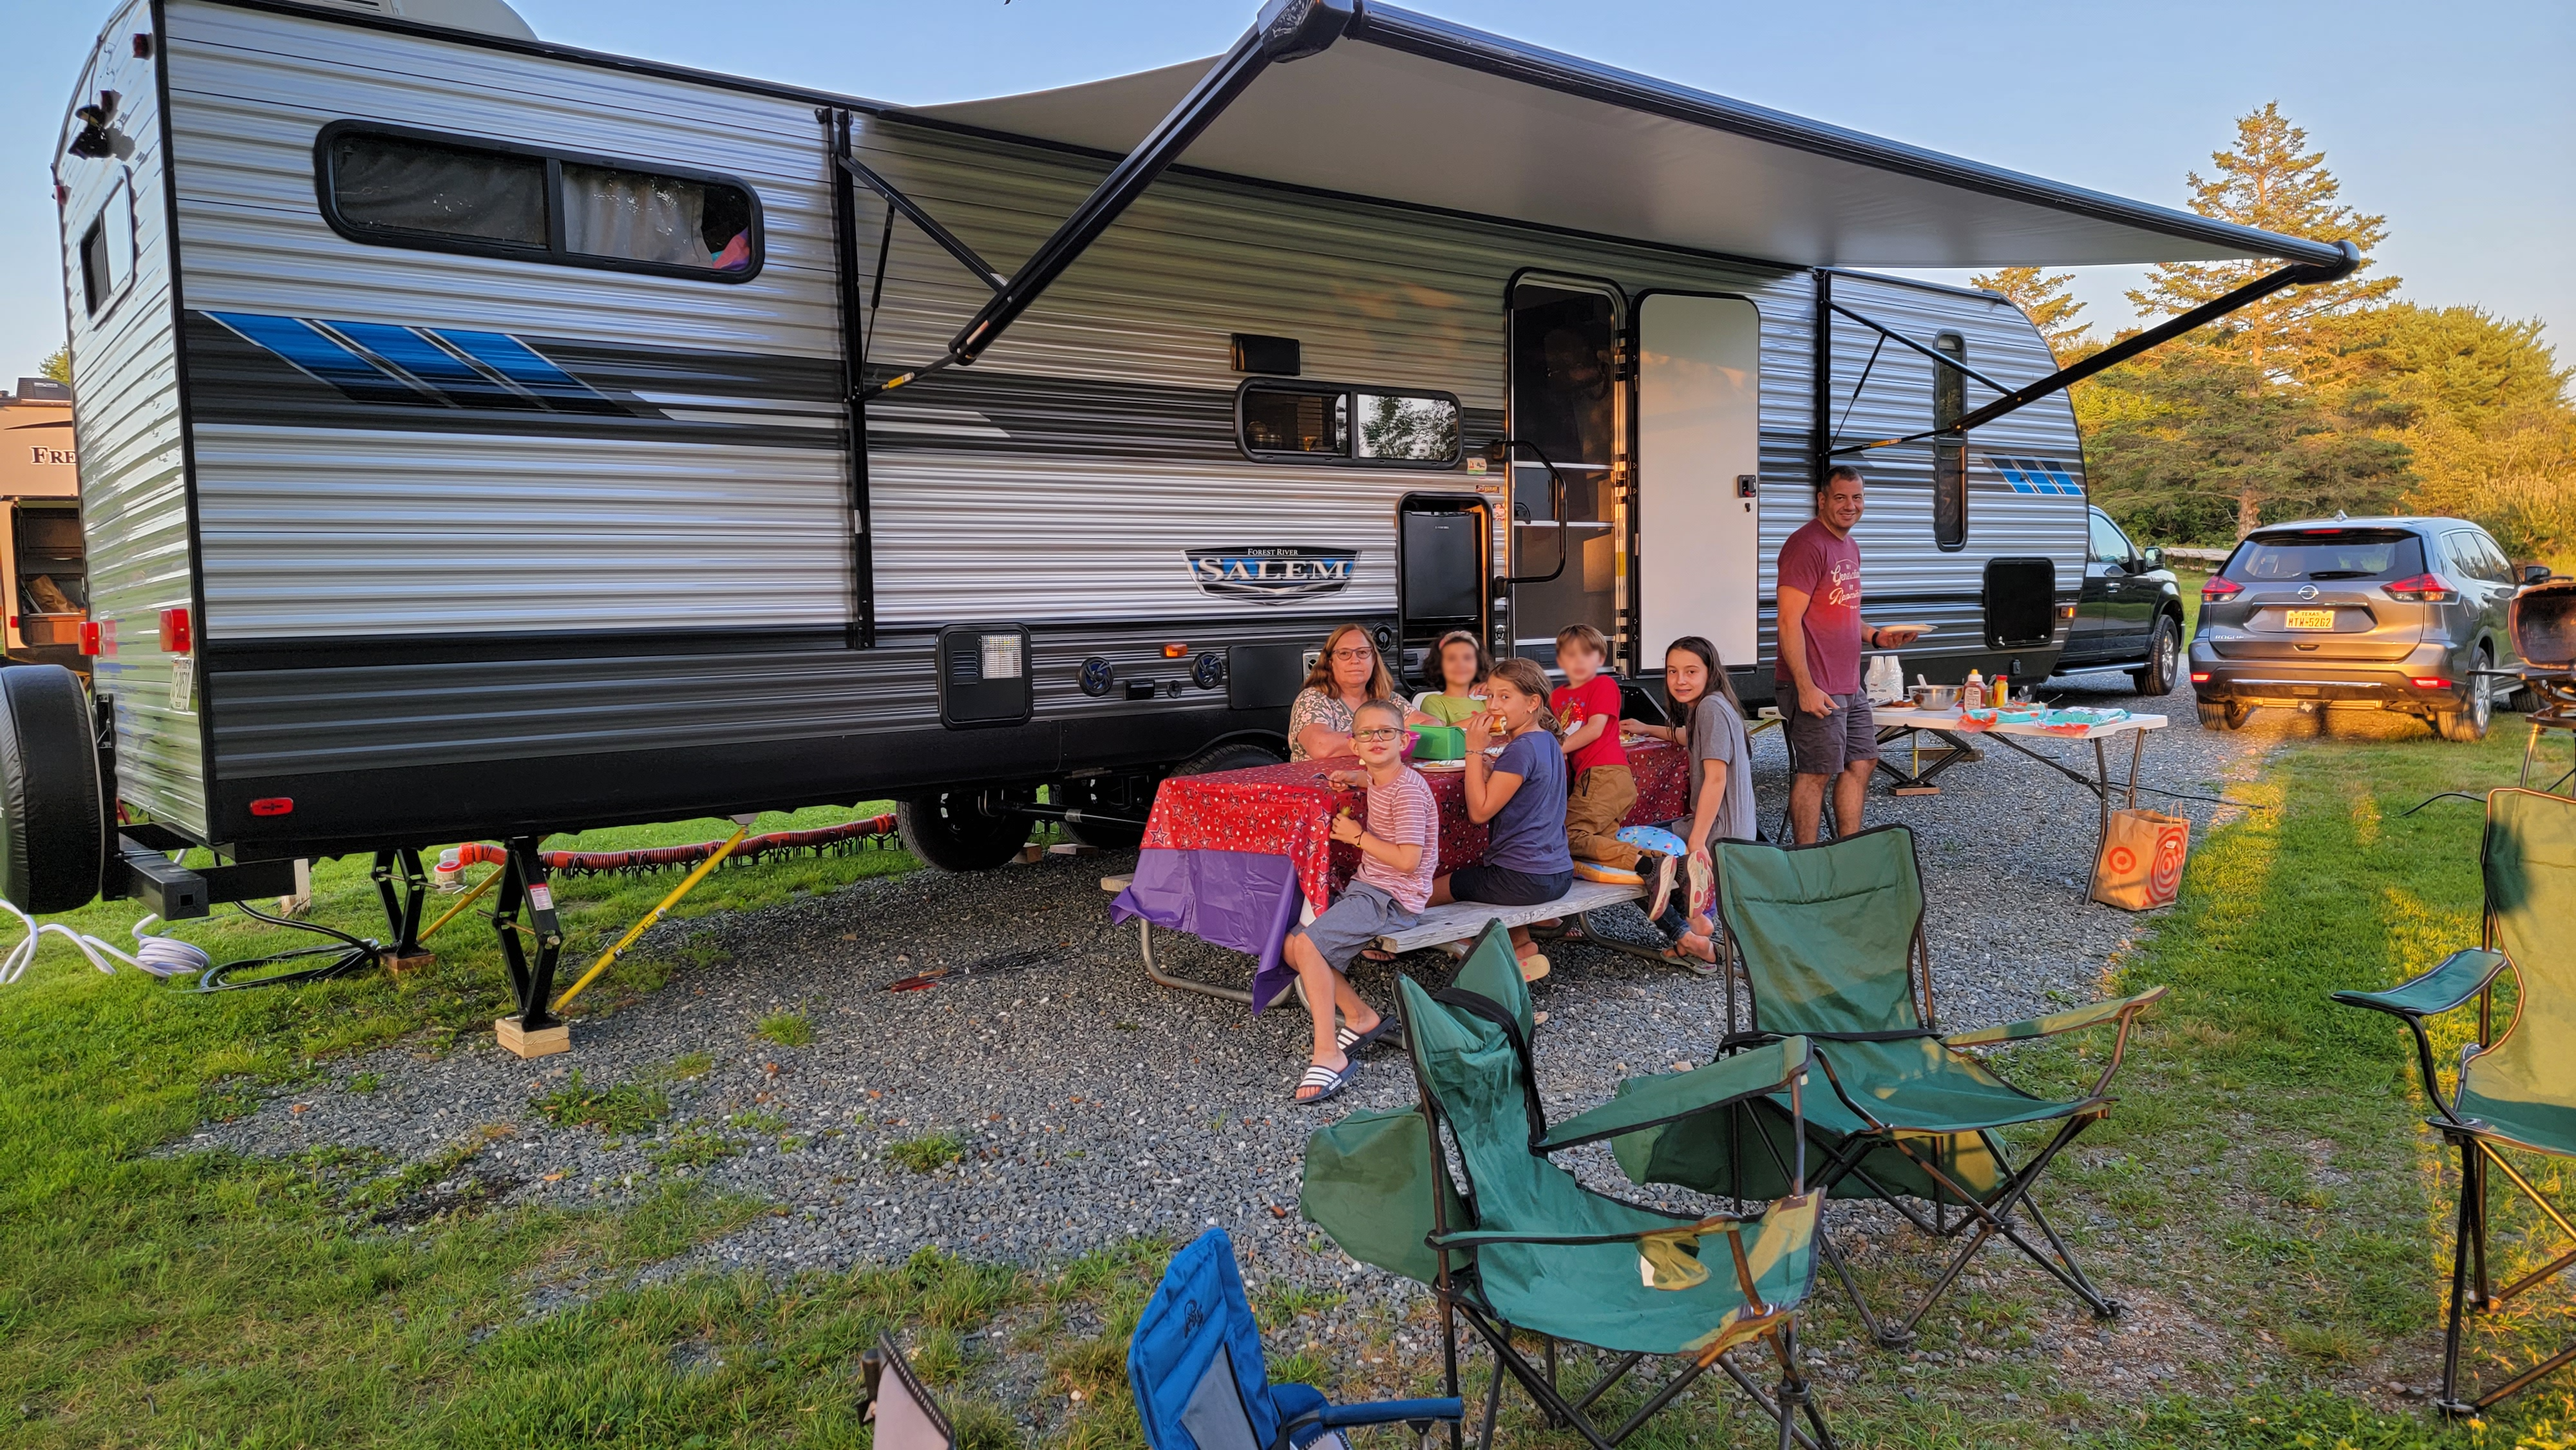 Family of 7 eating at picnic table in front of travel trailer